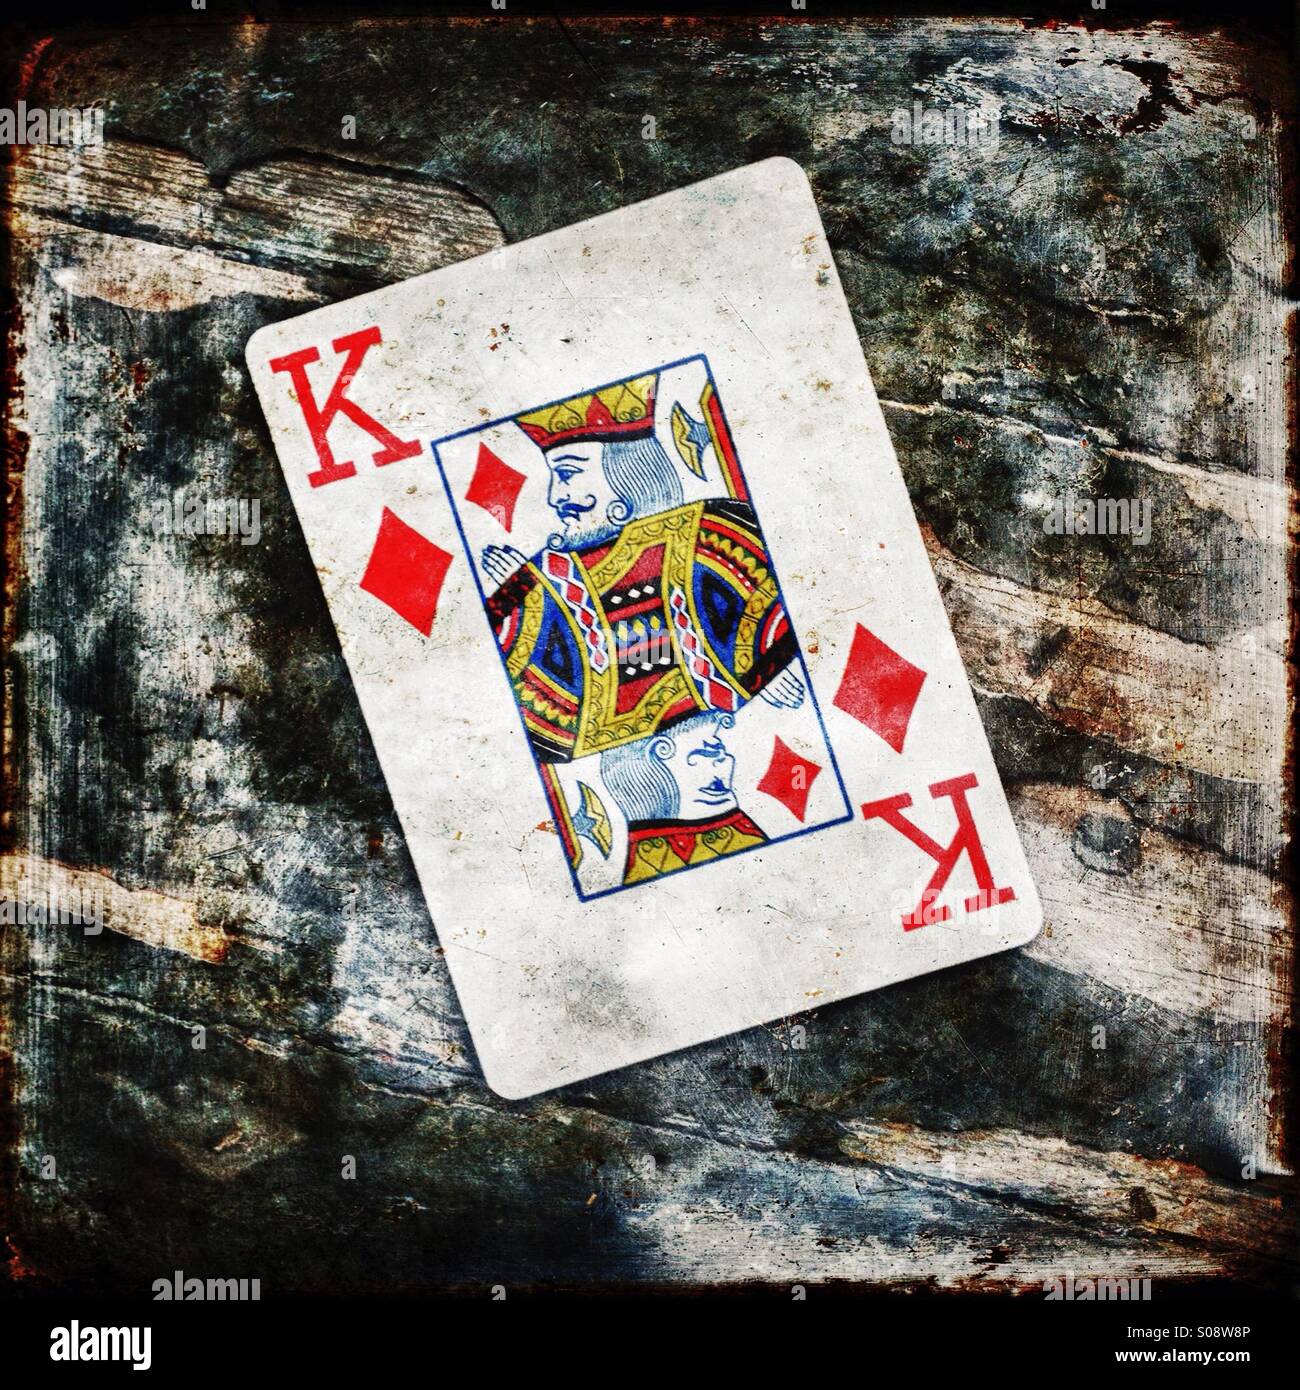 The king of diamonds from a deck of playing cards Stock Photo